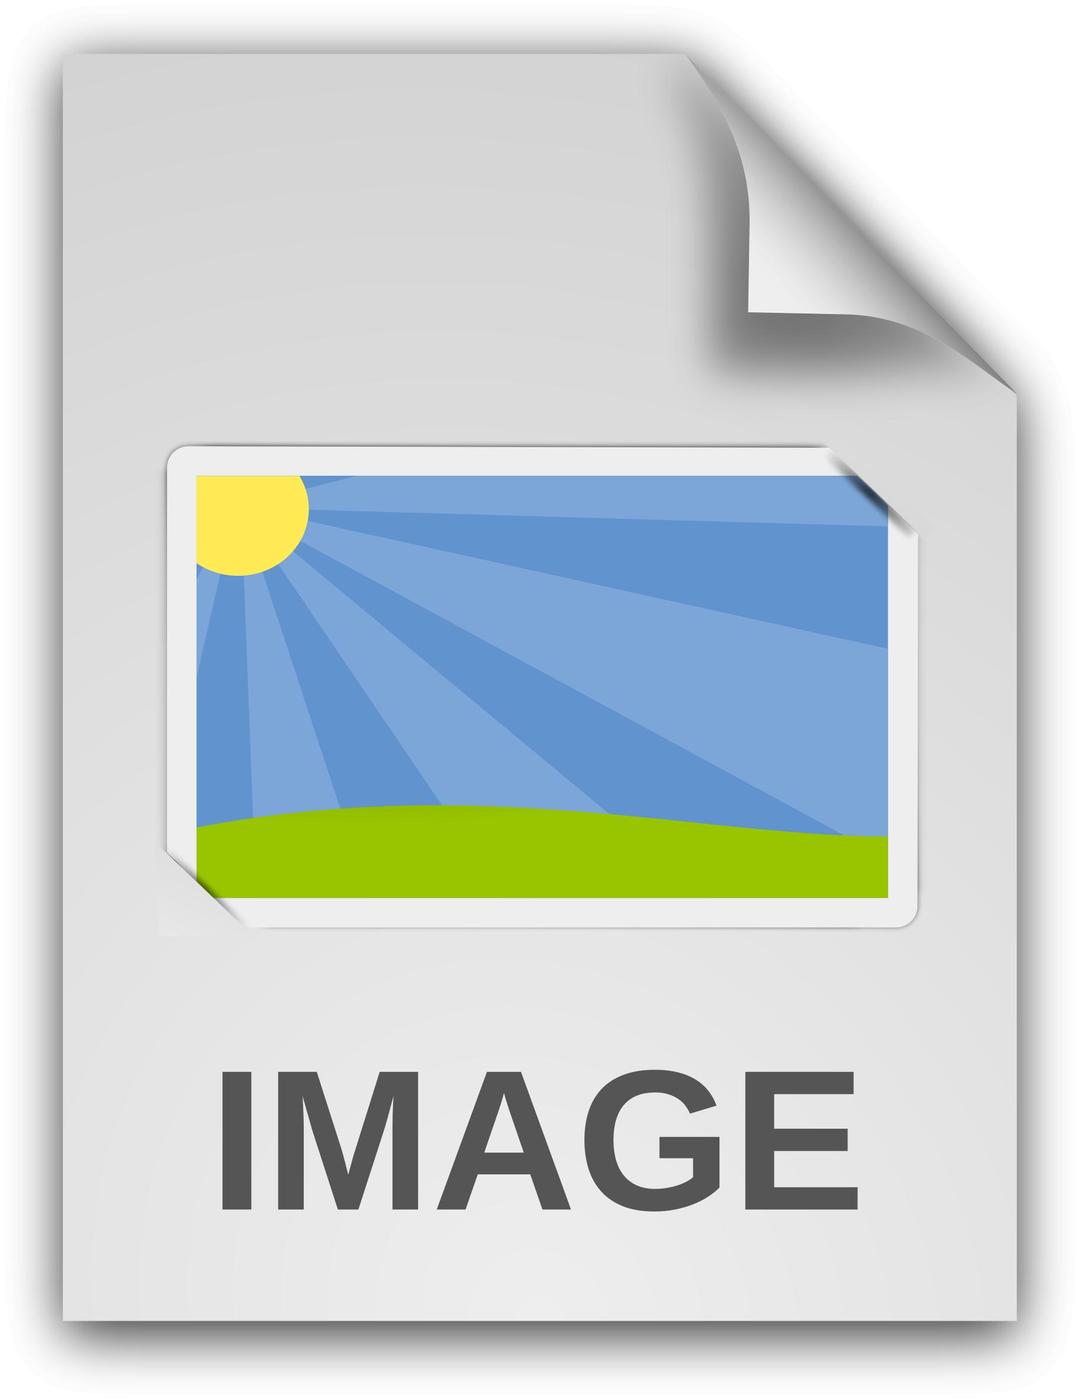 Image Document Icon png transparent